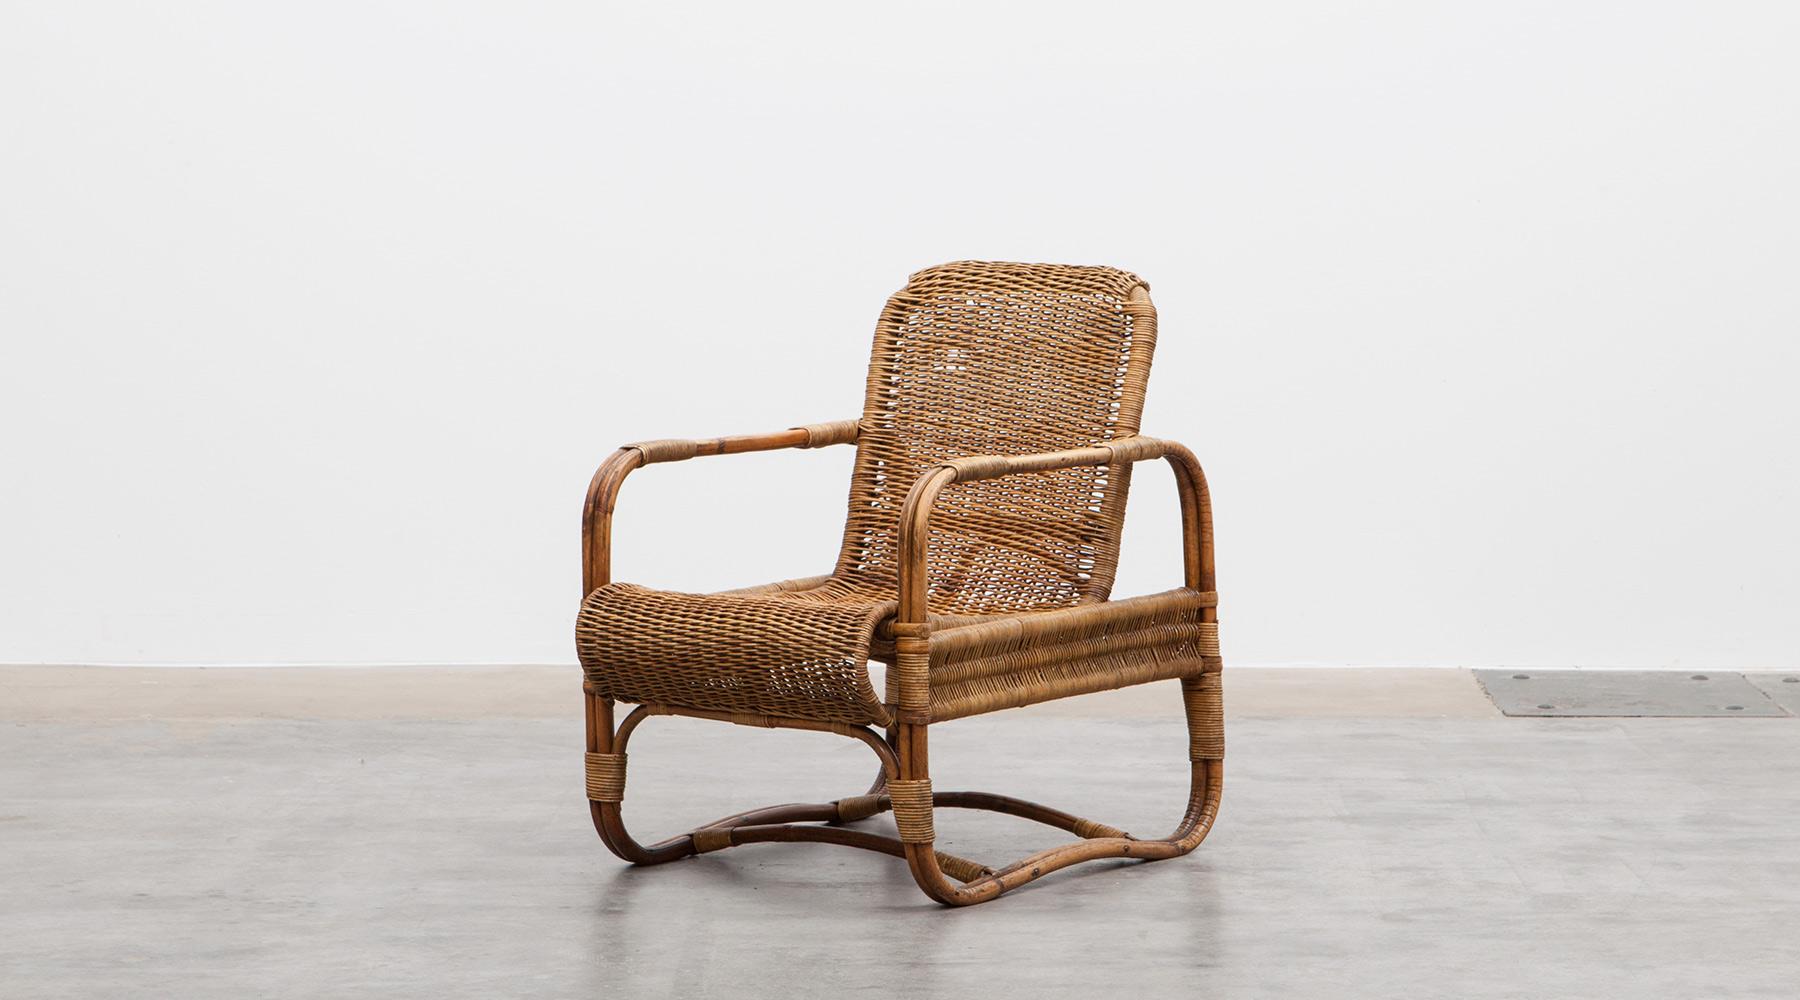 Rattan chair by Erich Dieckmann, Germany, 1931.

The single chair by Erich Dieckmann from 1931 is made out of cane. Although the shape is curvy, the rattan chair keeps the typical clear shape of Dieckmann. Manufactured by F. Kerber, Germany.